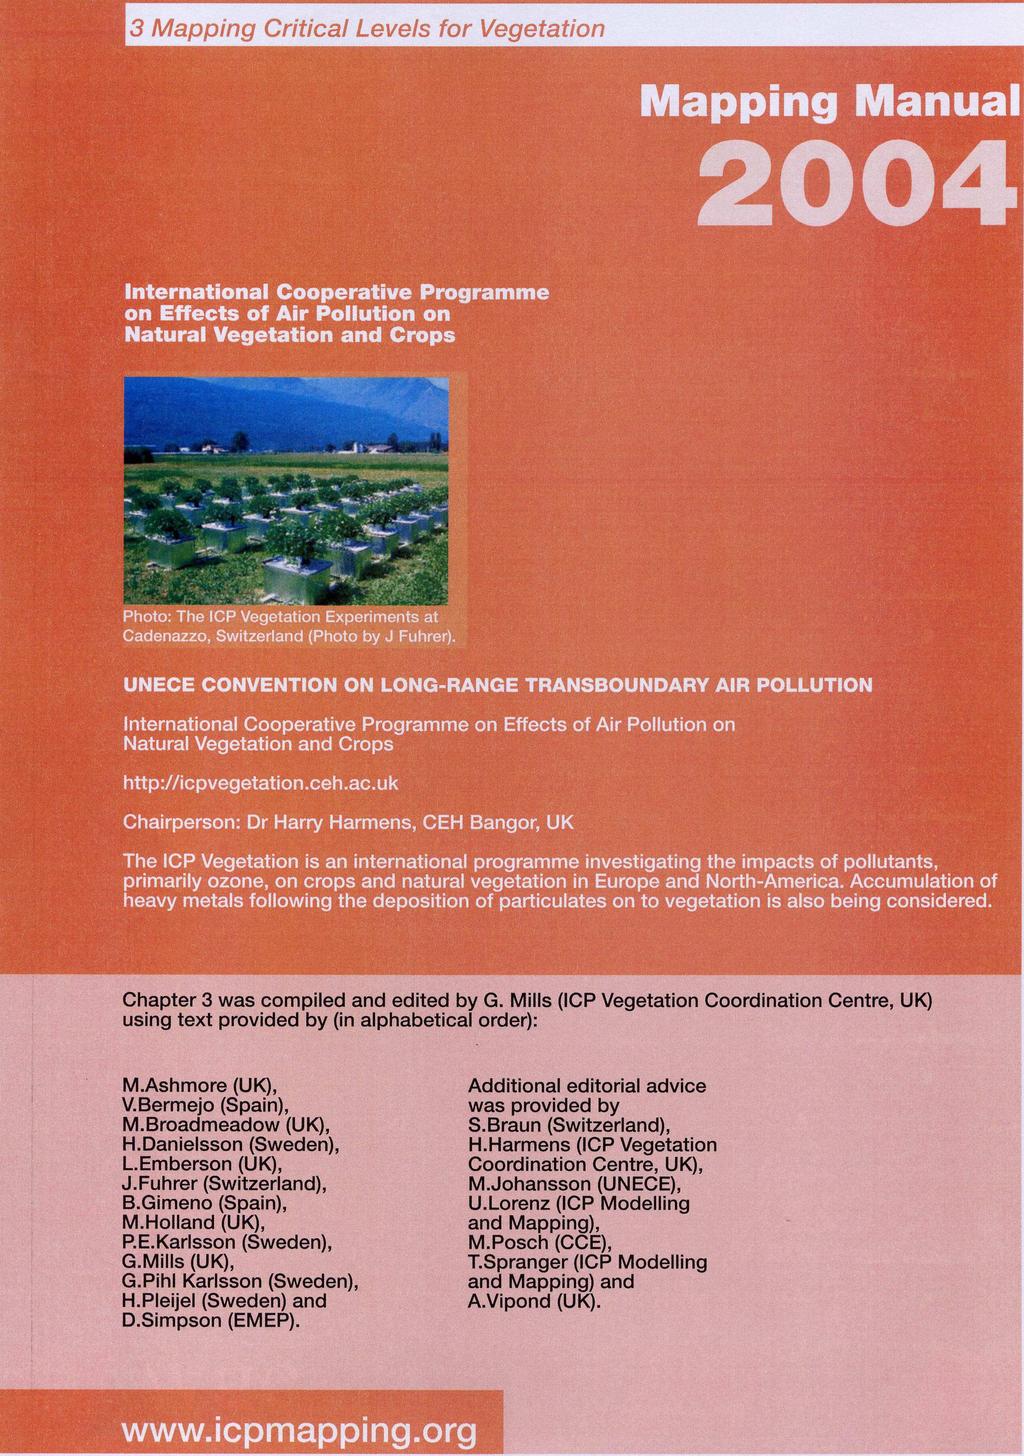 LRTAP Convention Mapping Manual Chapter 3: Mapping Critical Levels for Vegetation Substantially revised in 2004